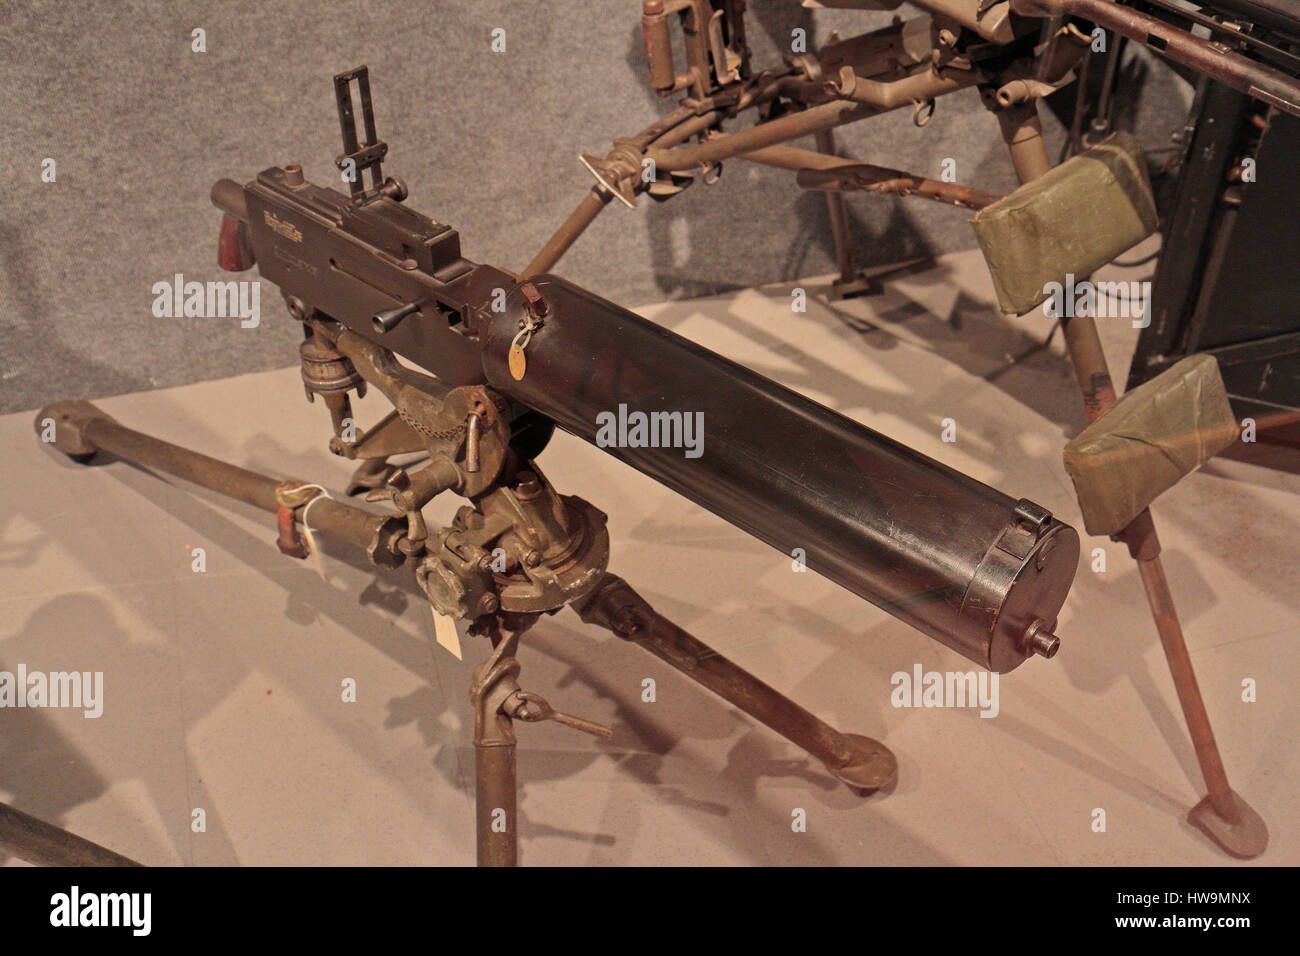 A M1917 Browning machine gun is a heavy machine gun on display in the Springfield Armory National Historic Site, Springfield, Ma, United States. Stock Photo